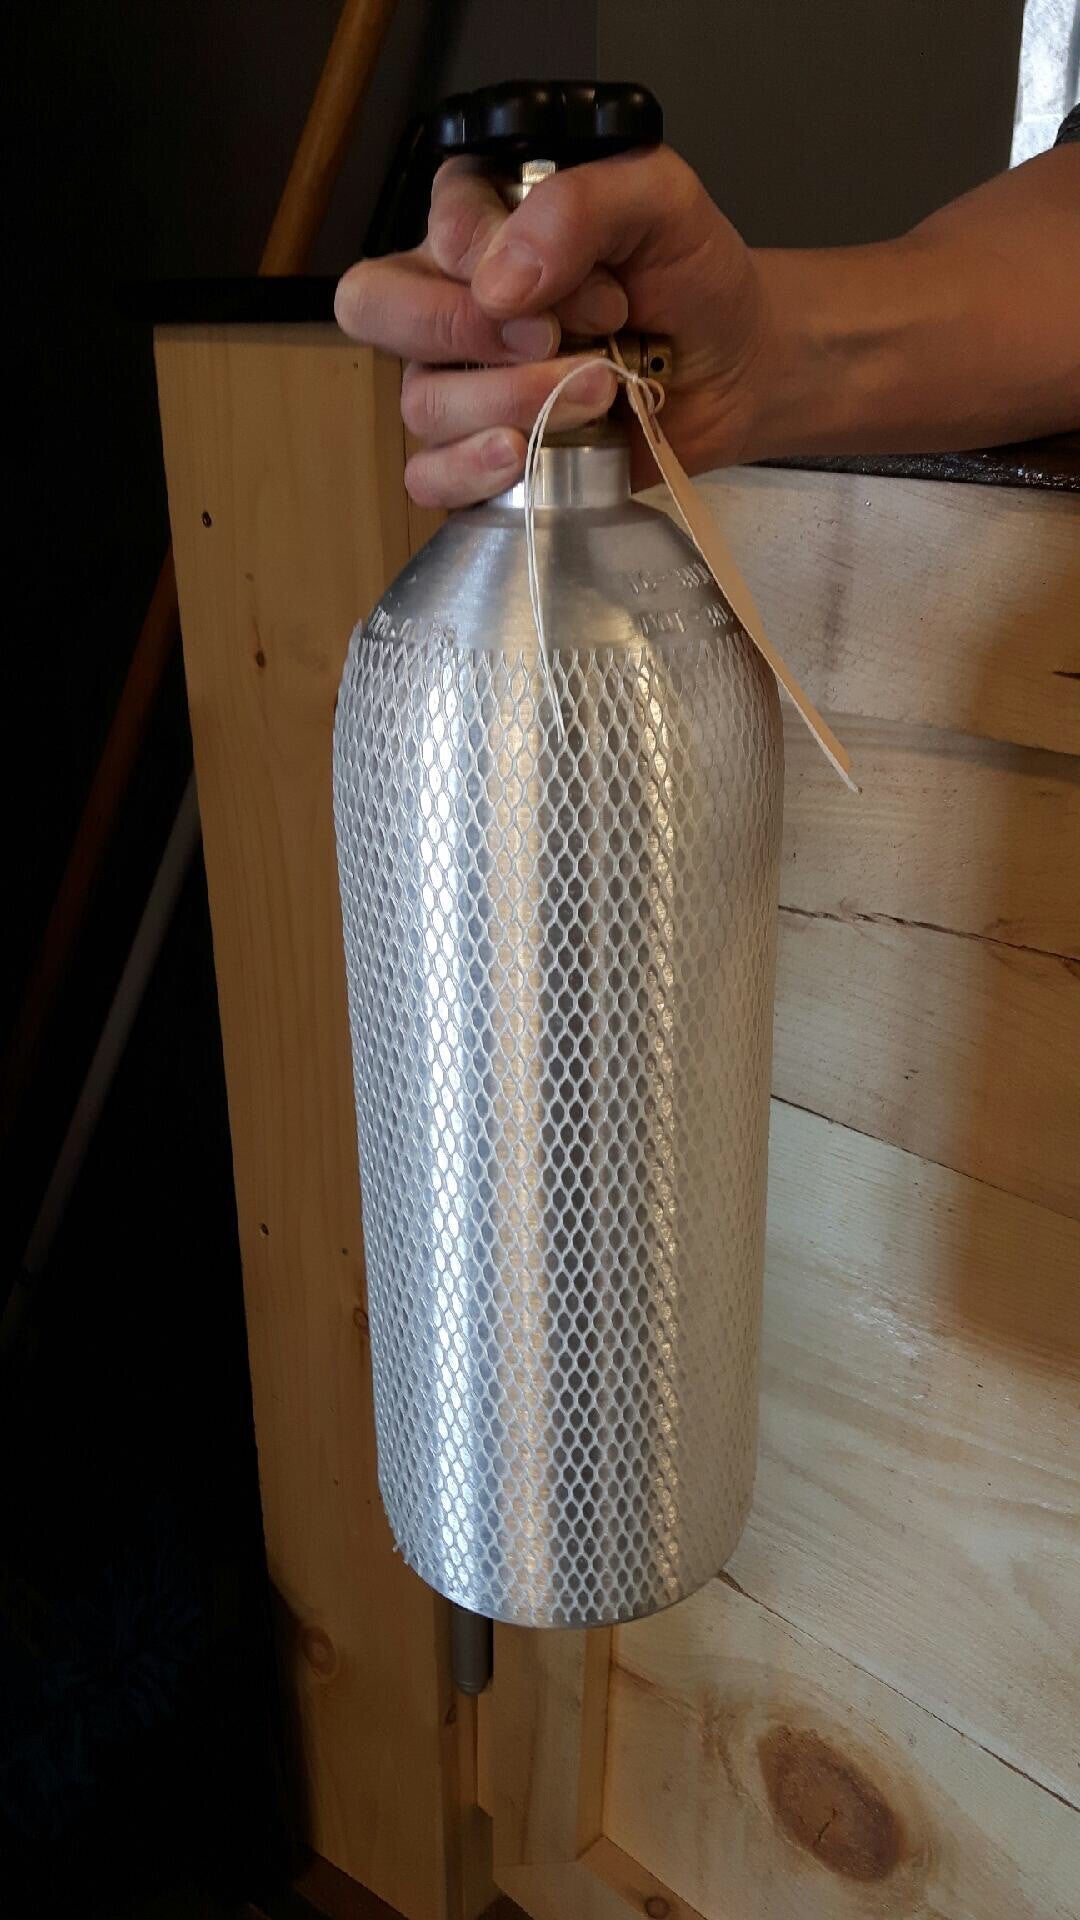 CO2 Tanks and services - Full Beard Brewing